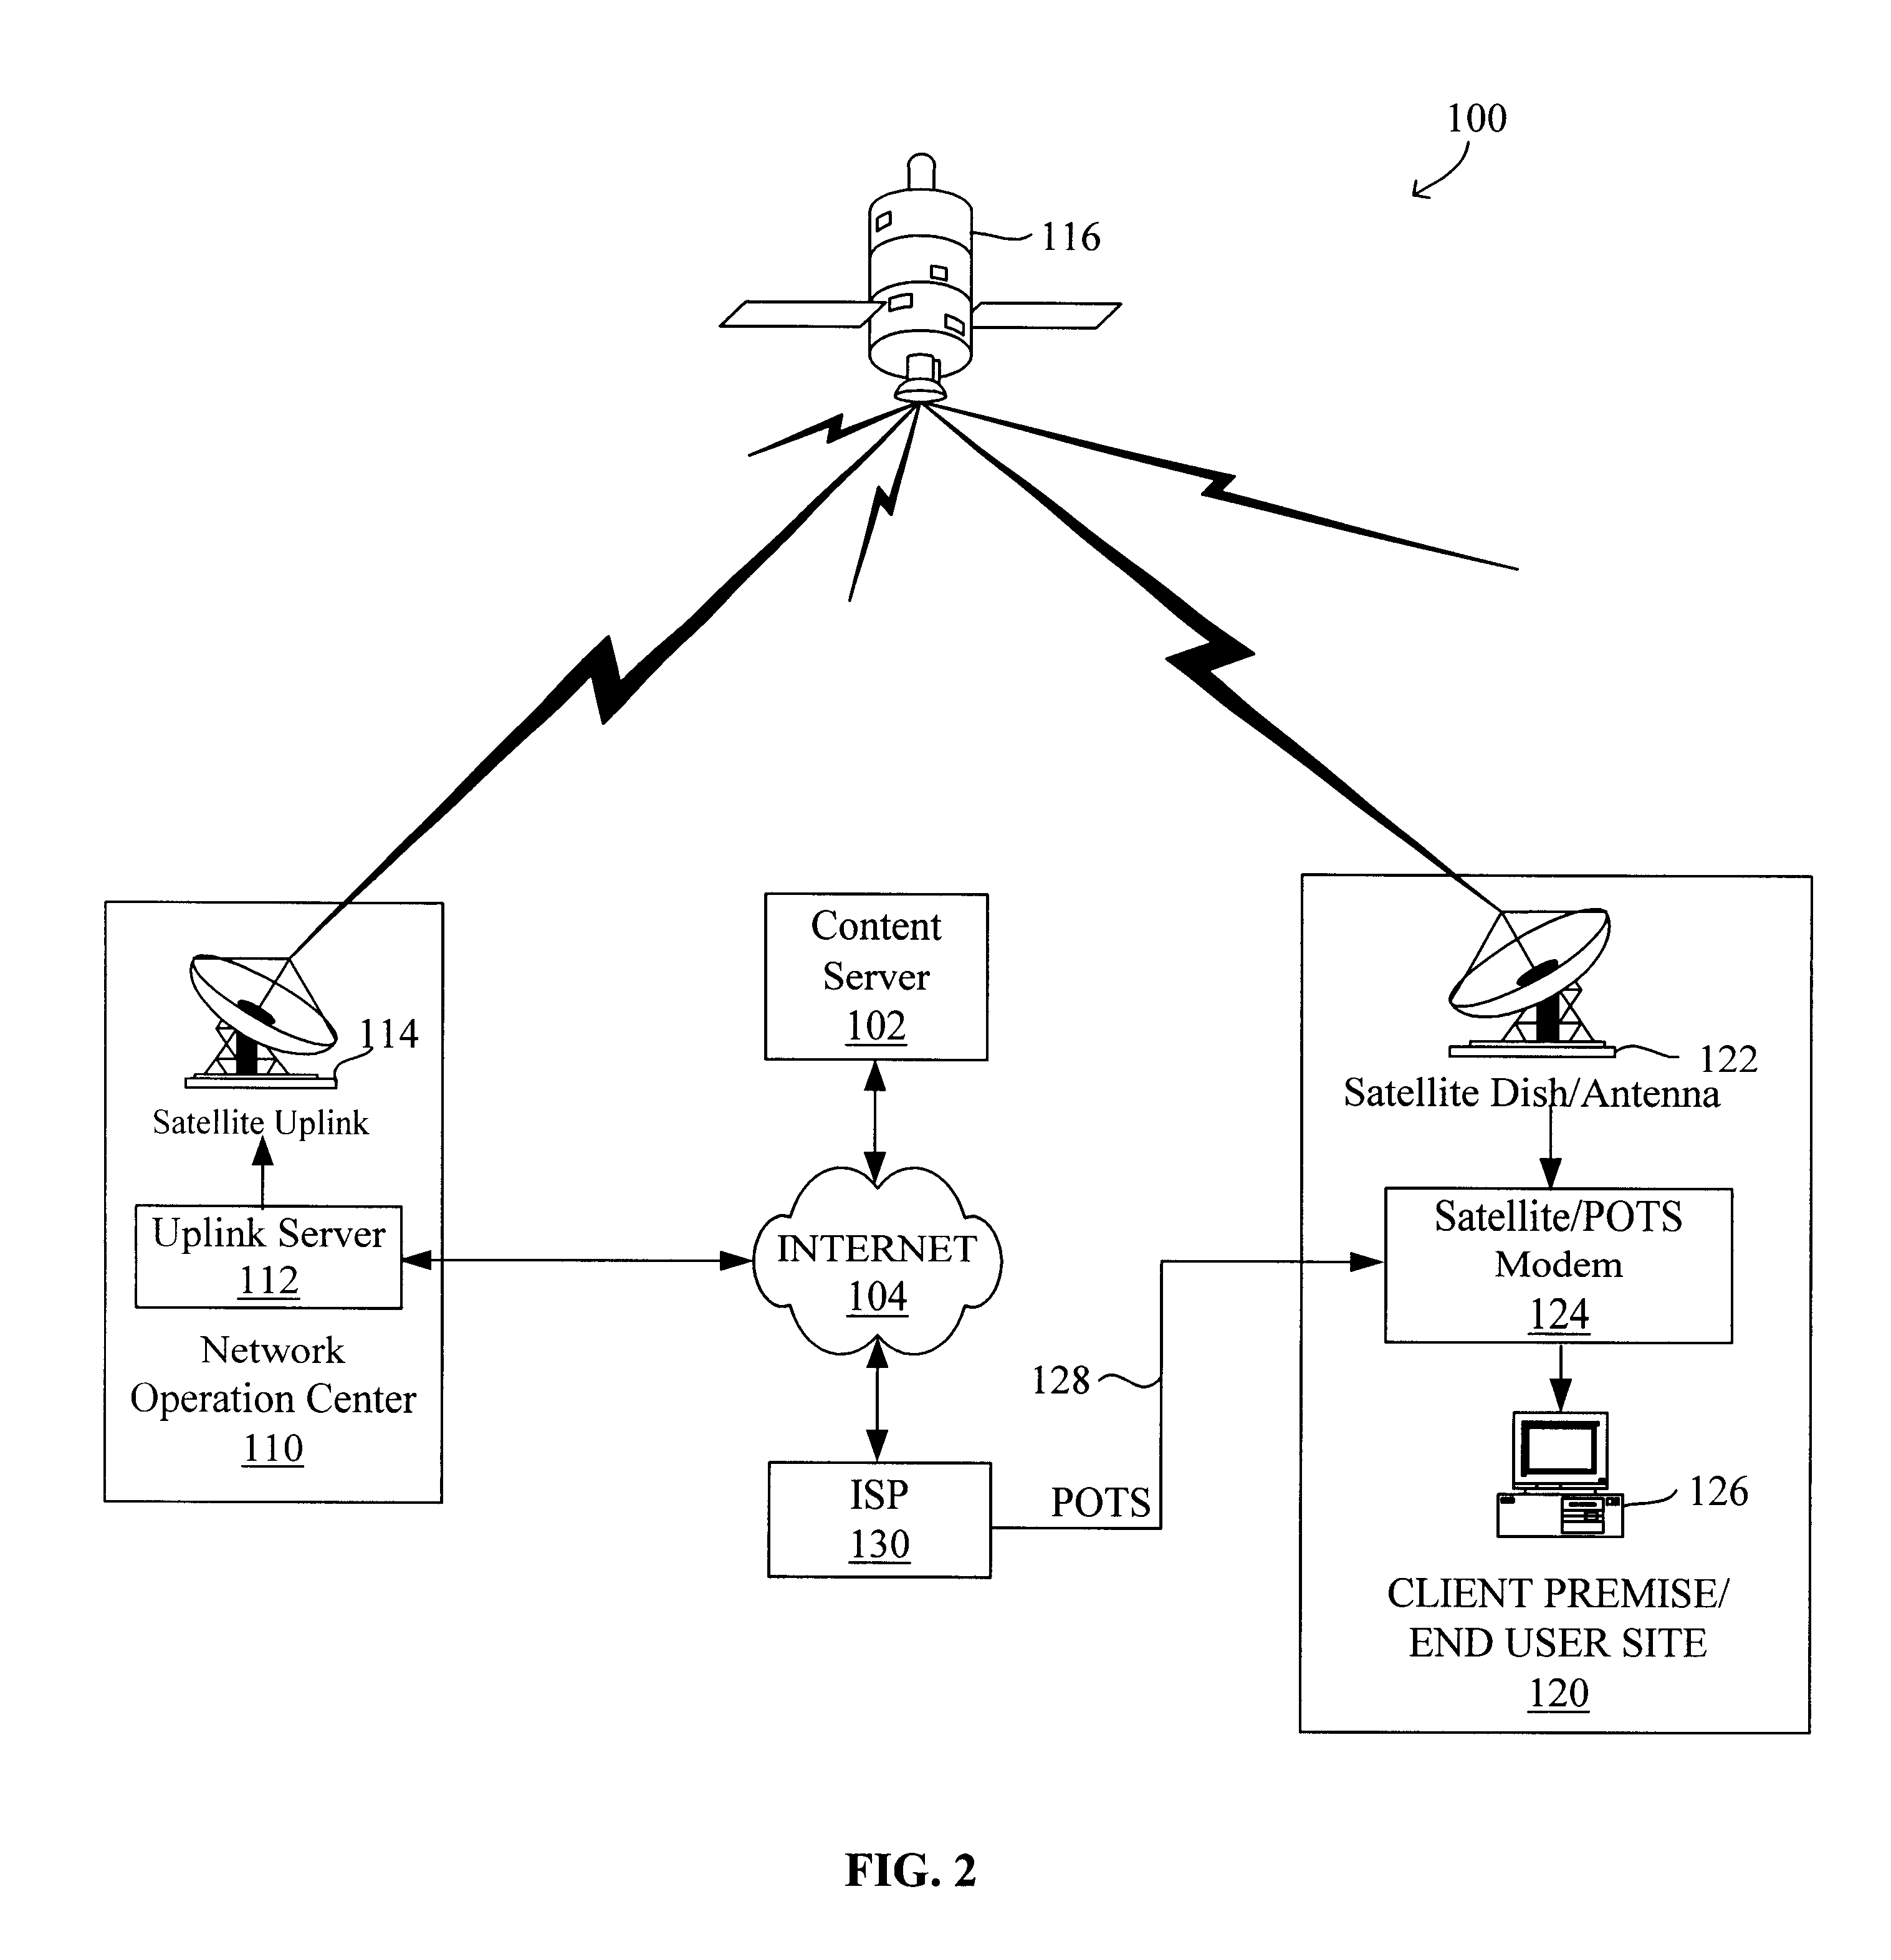 System and method for providing internet content using hybrid wireless and wire technologies at the end user site